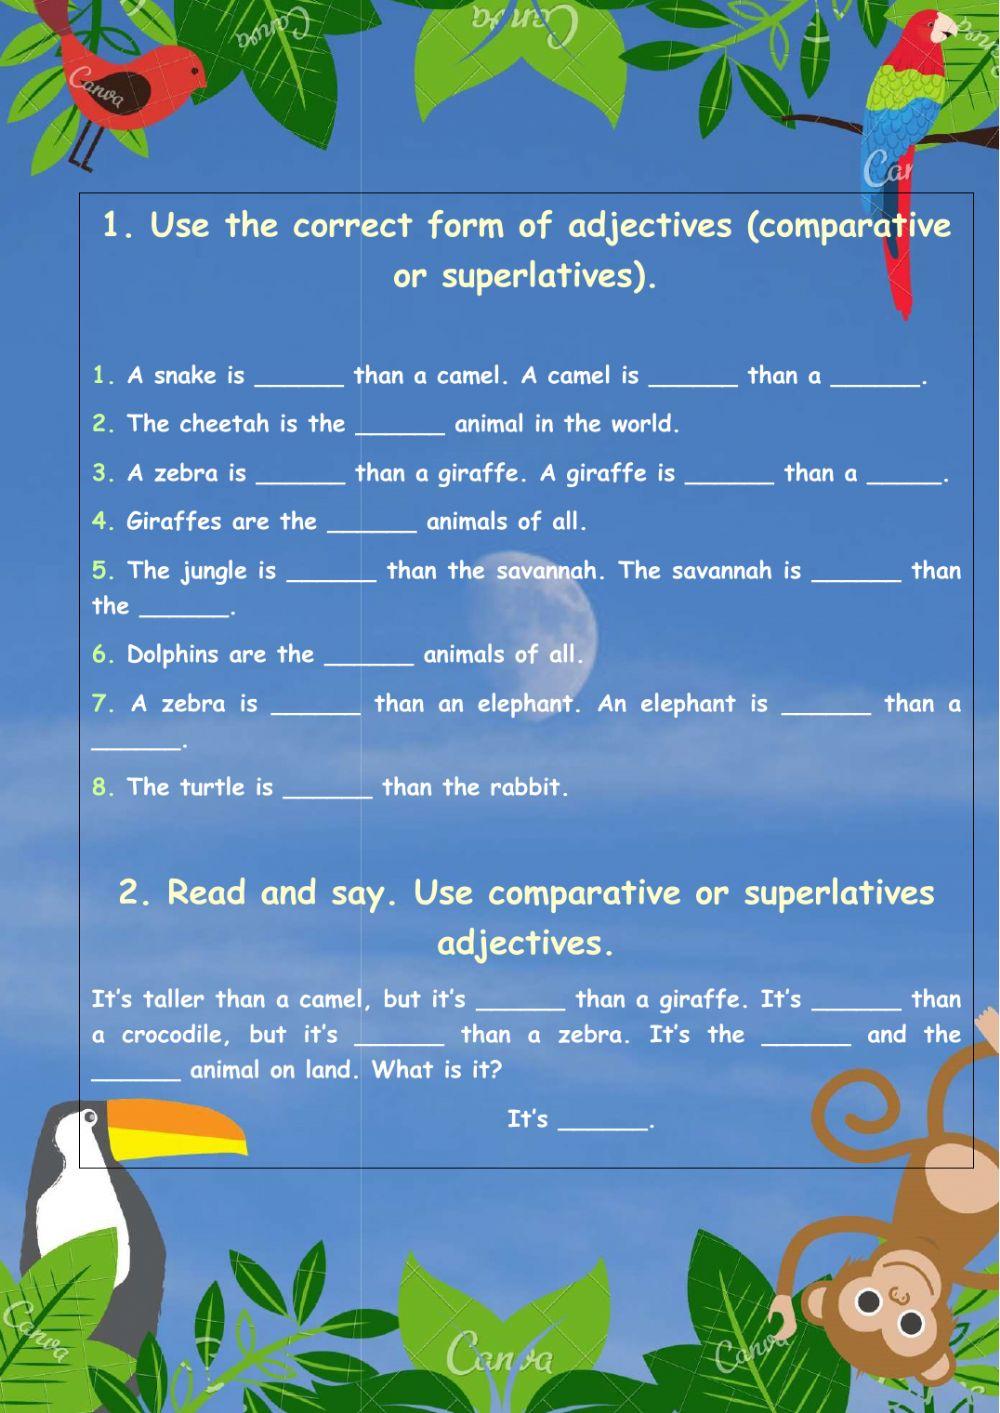 Comparative and superlatives adjectives